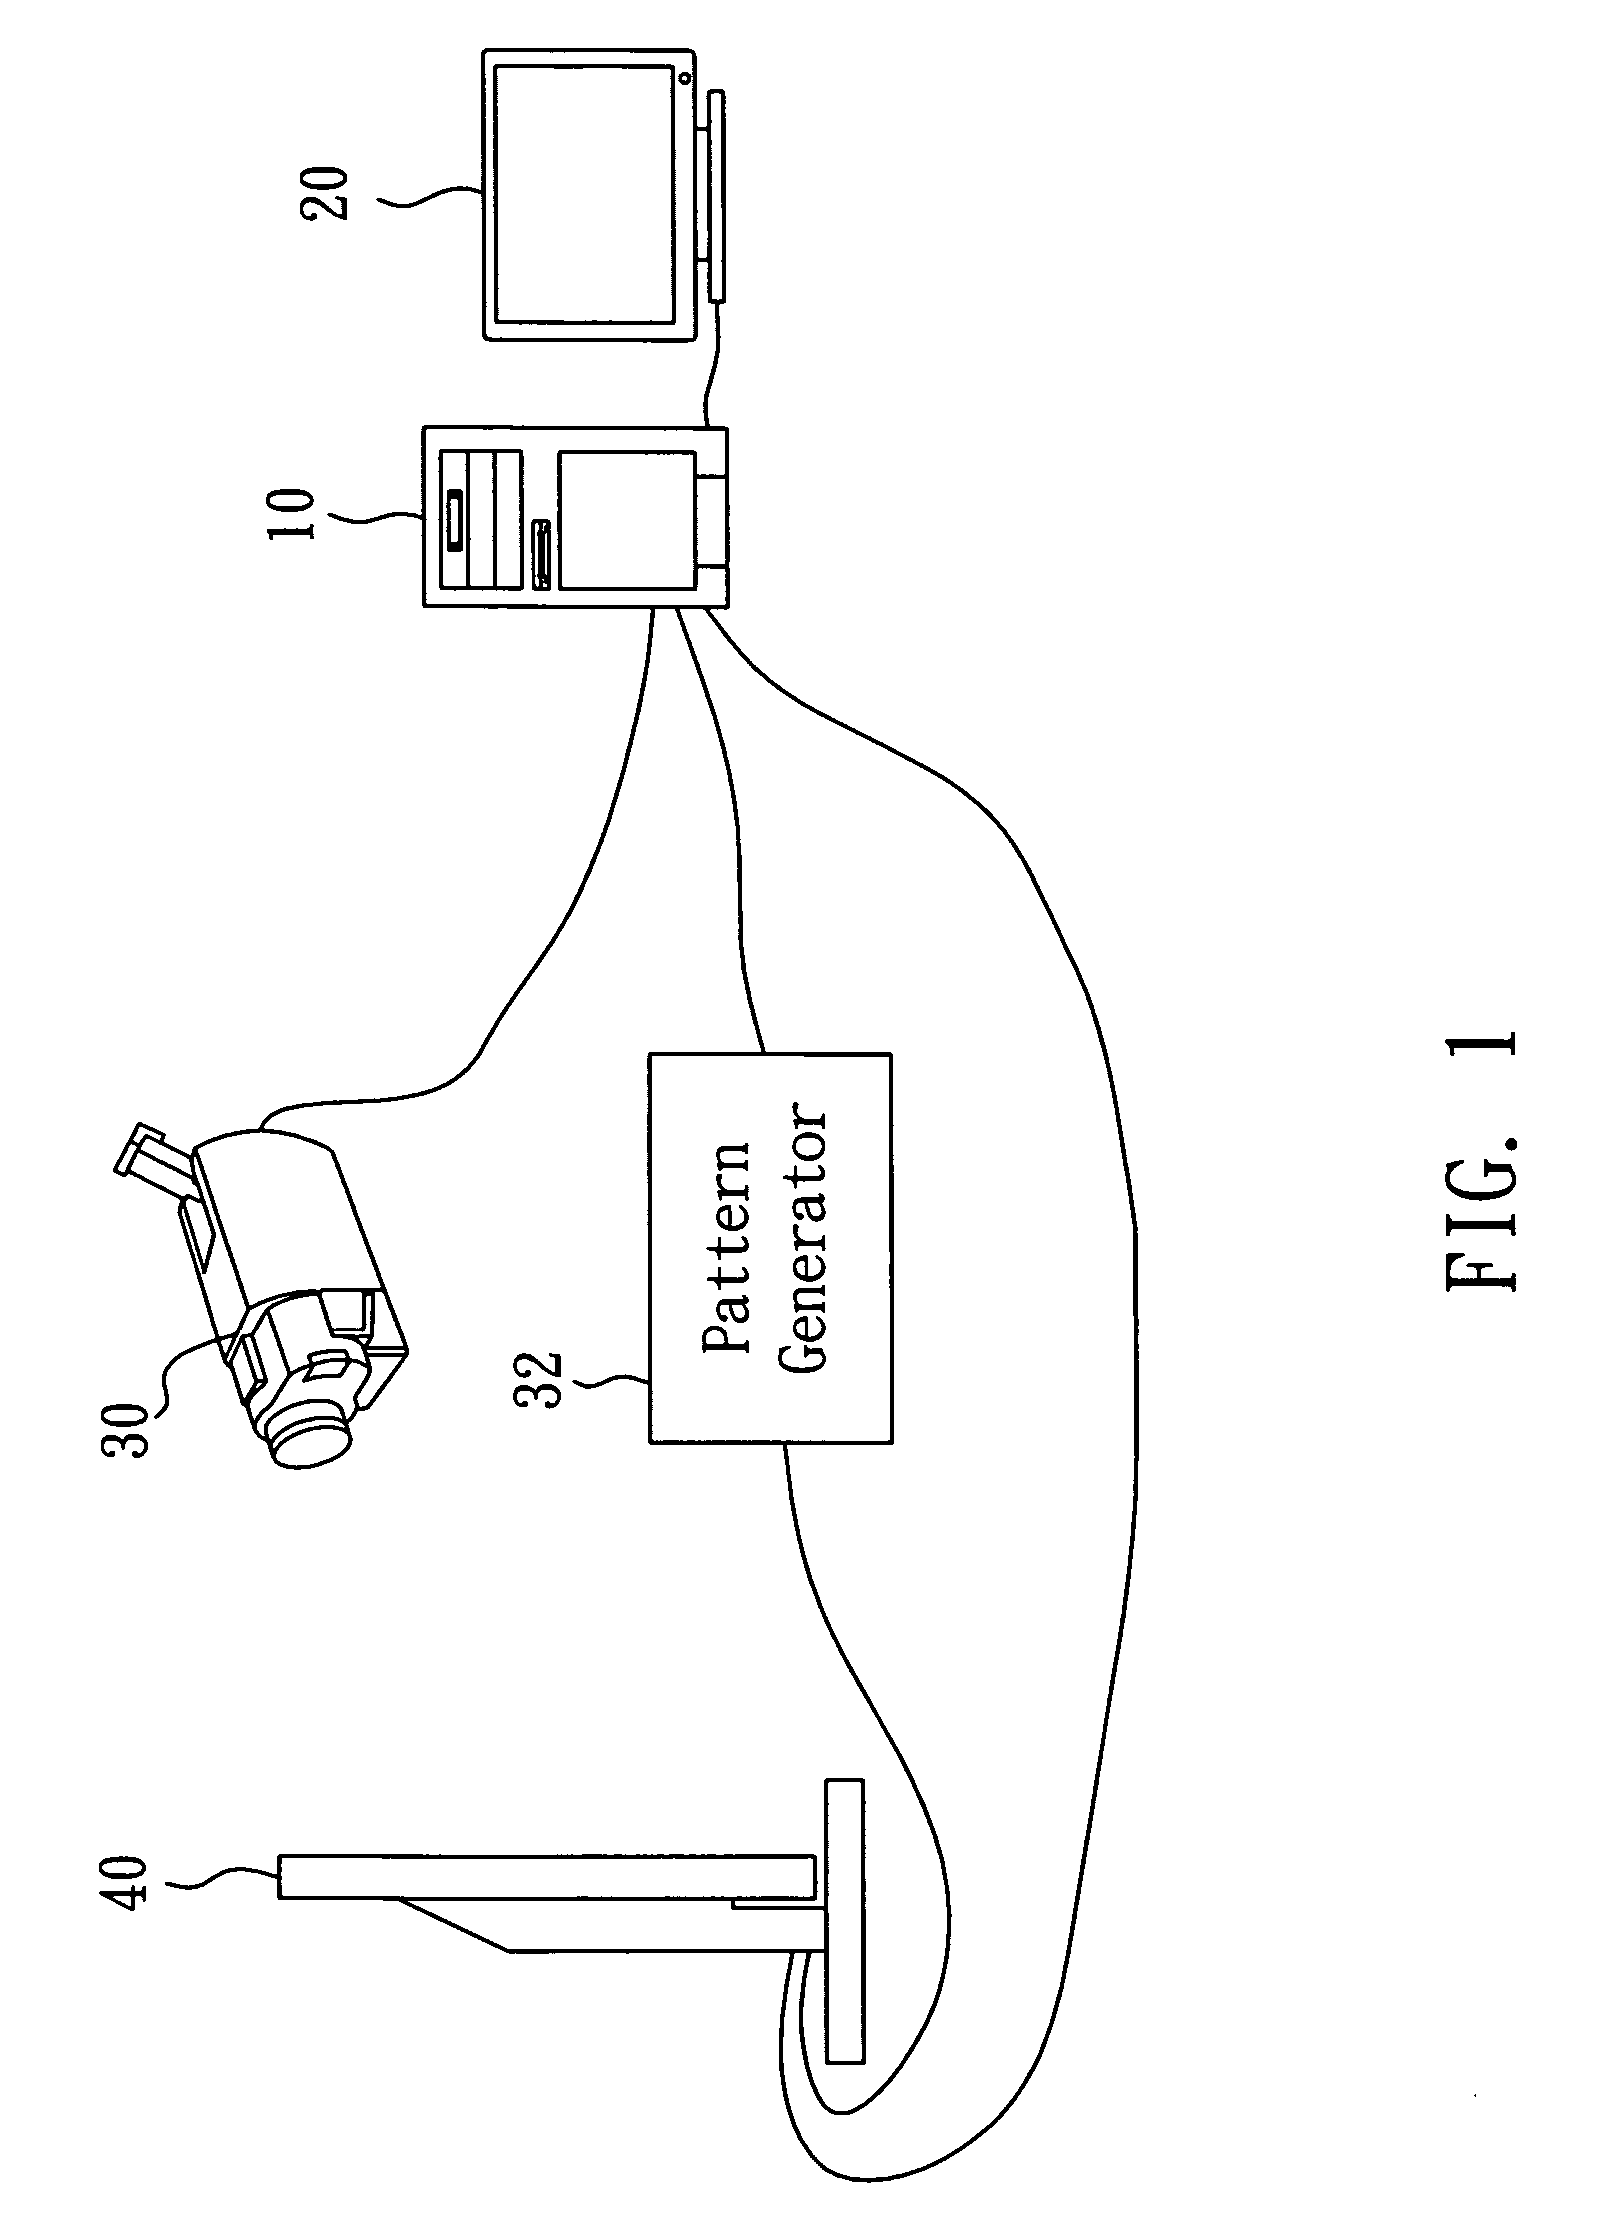 Method and system of color-real adjustment for adjusting a display device